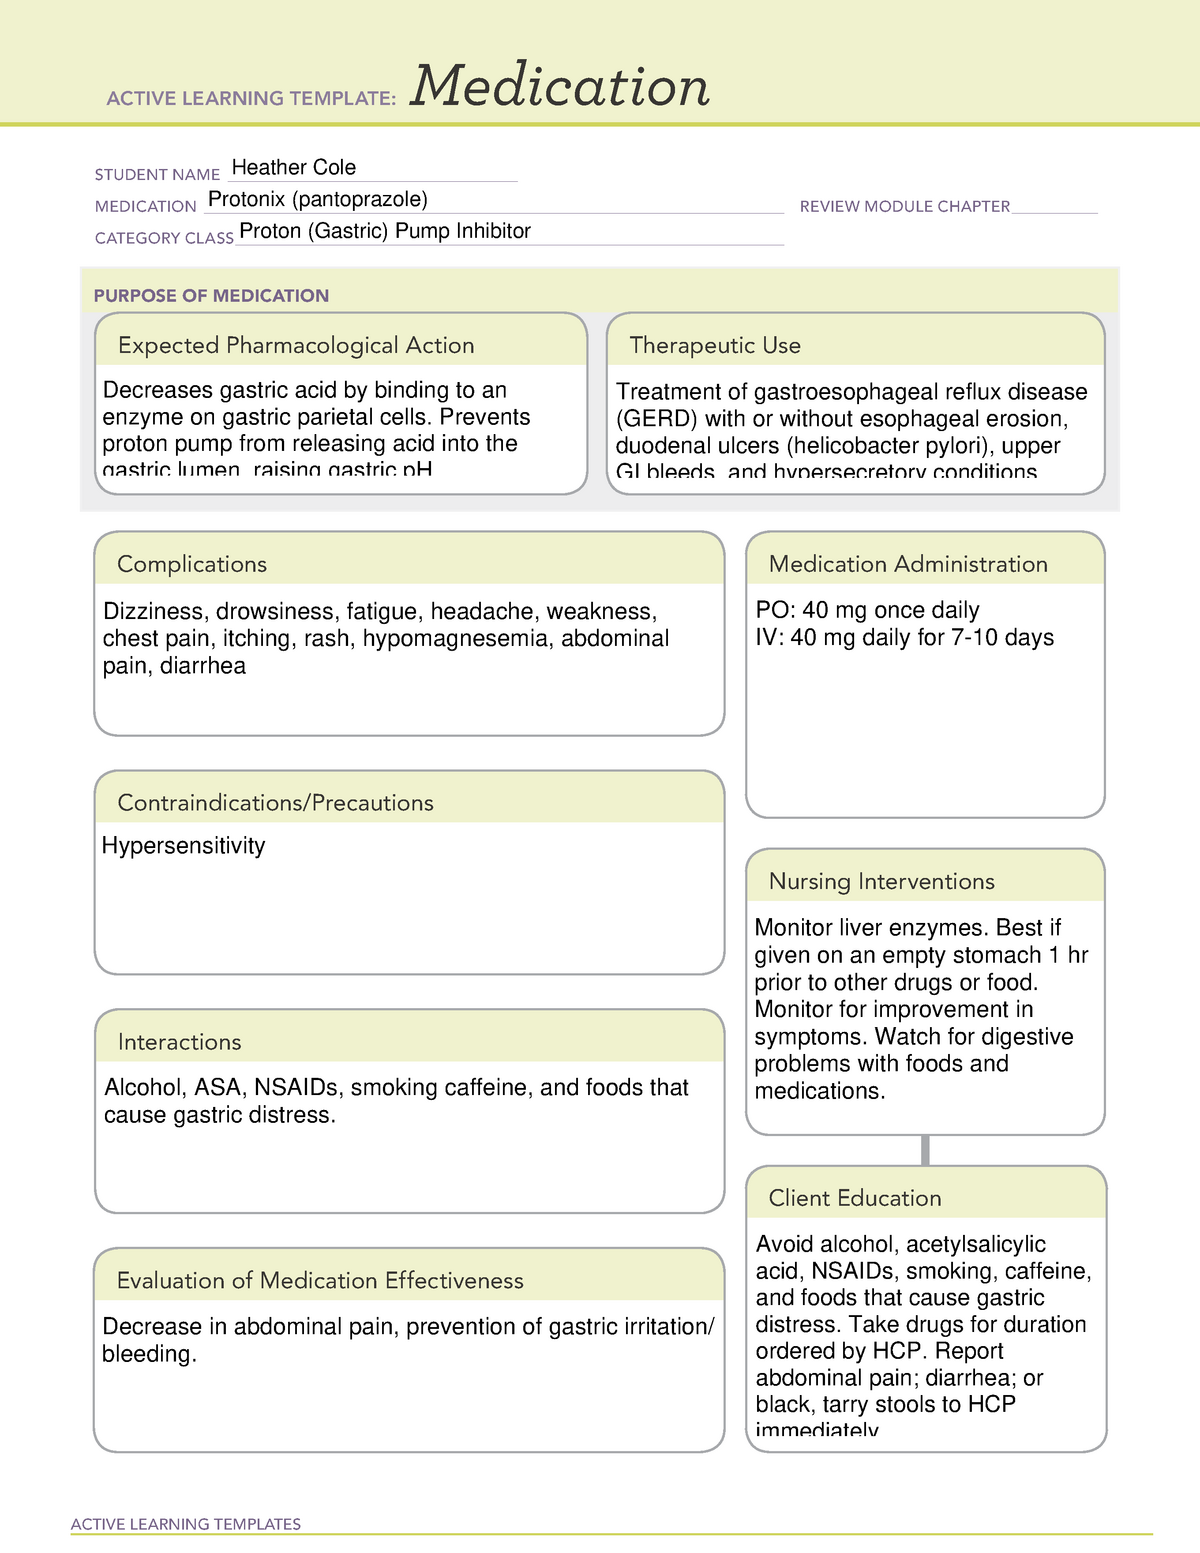 protonix-drug-cards-active-learning-templates-medication-student